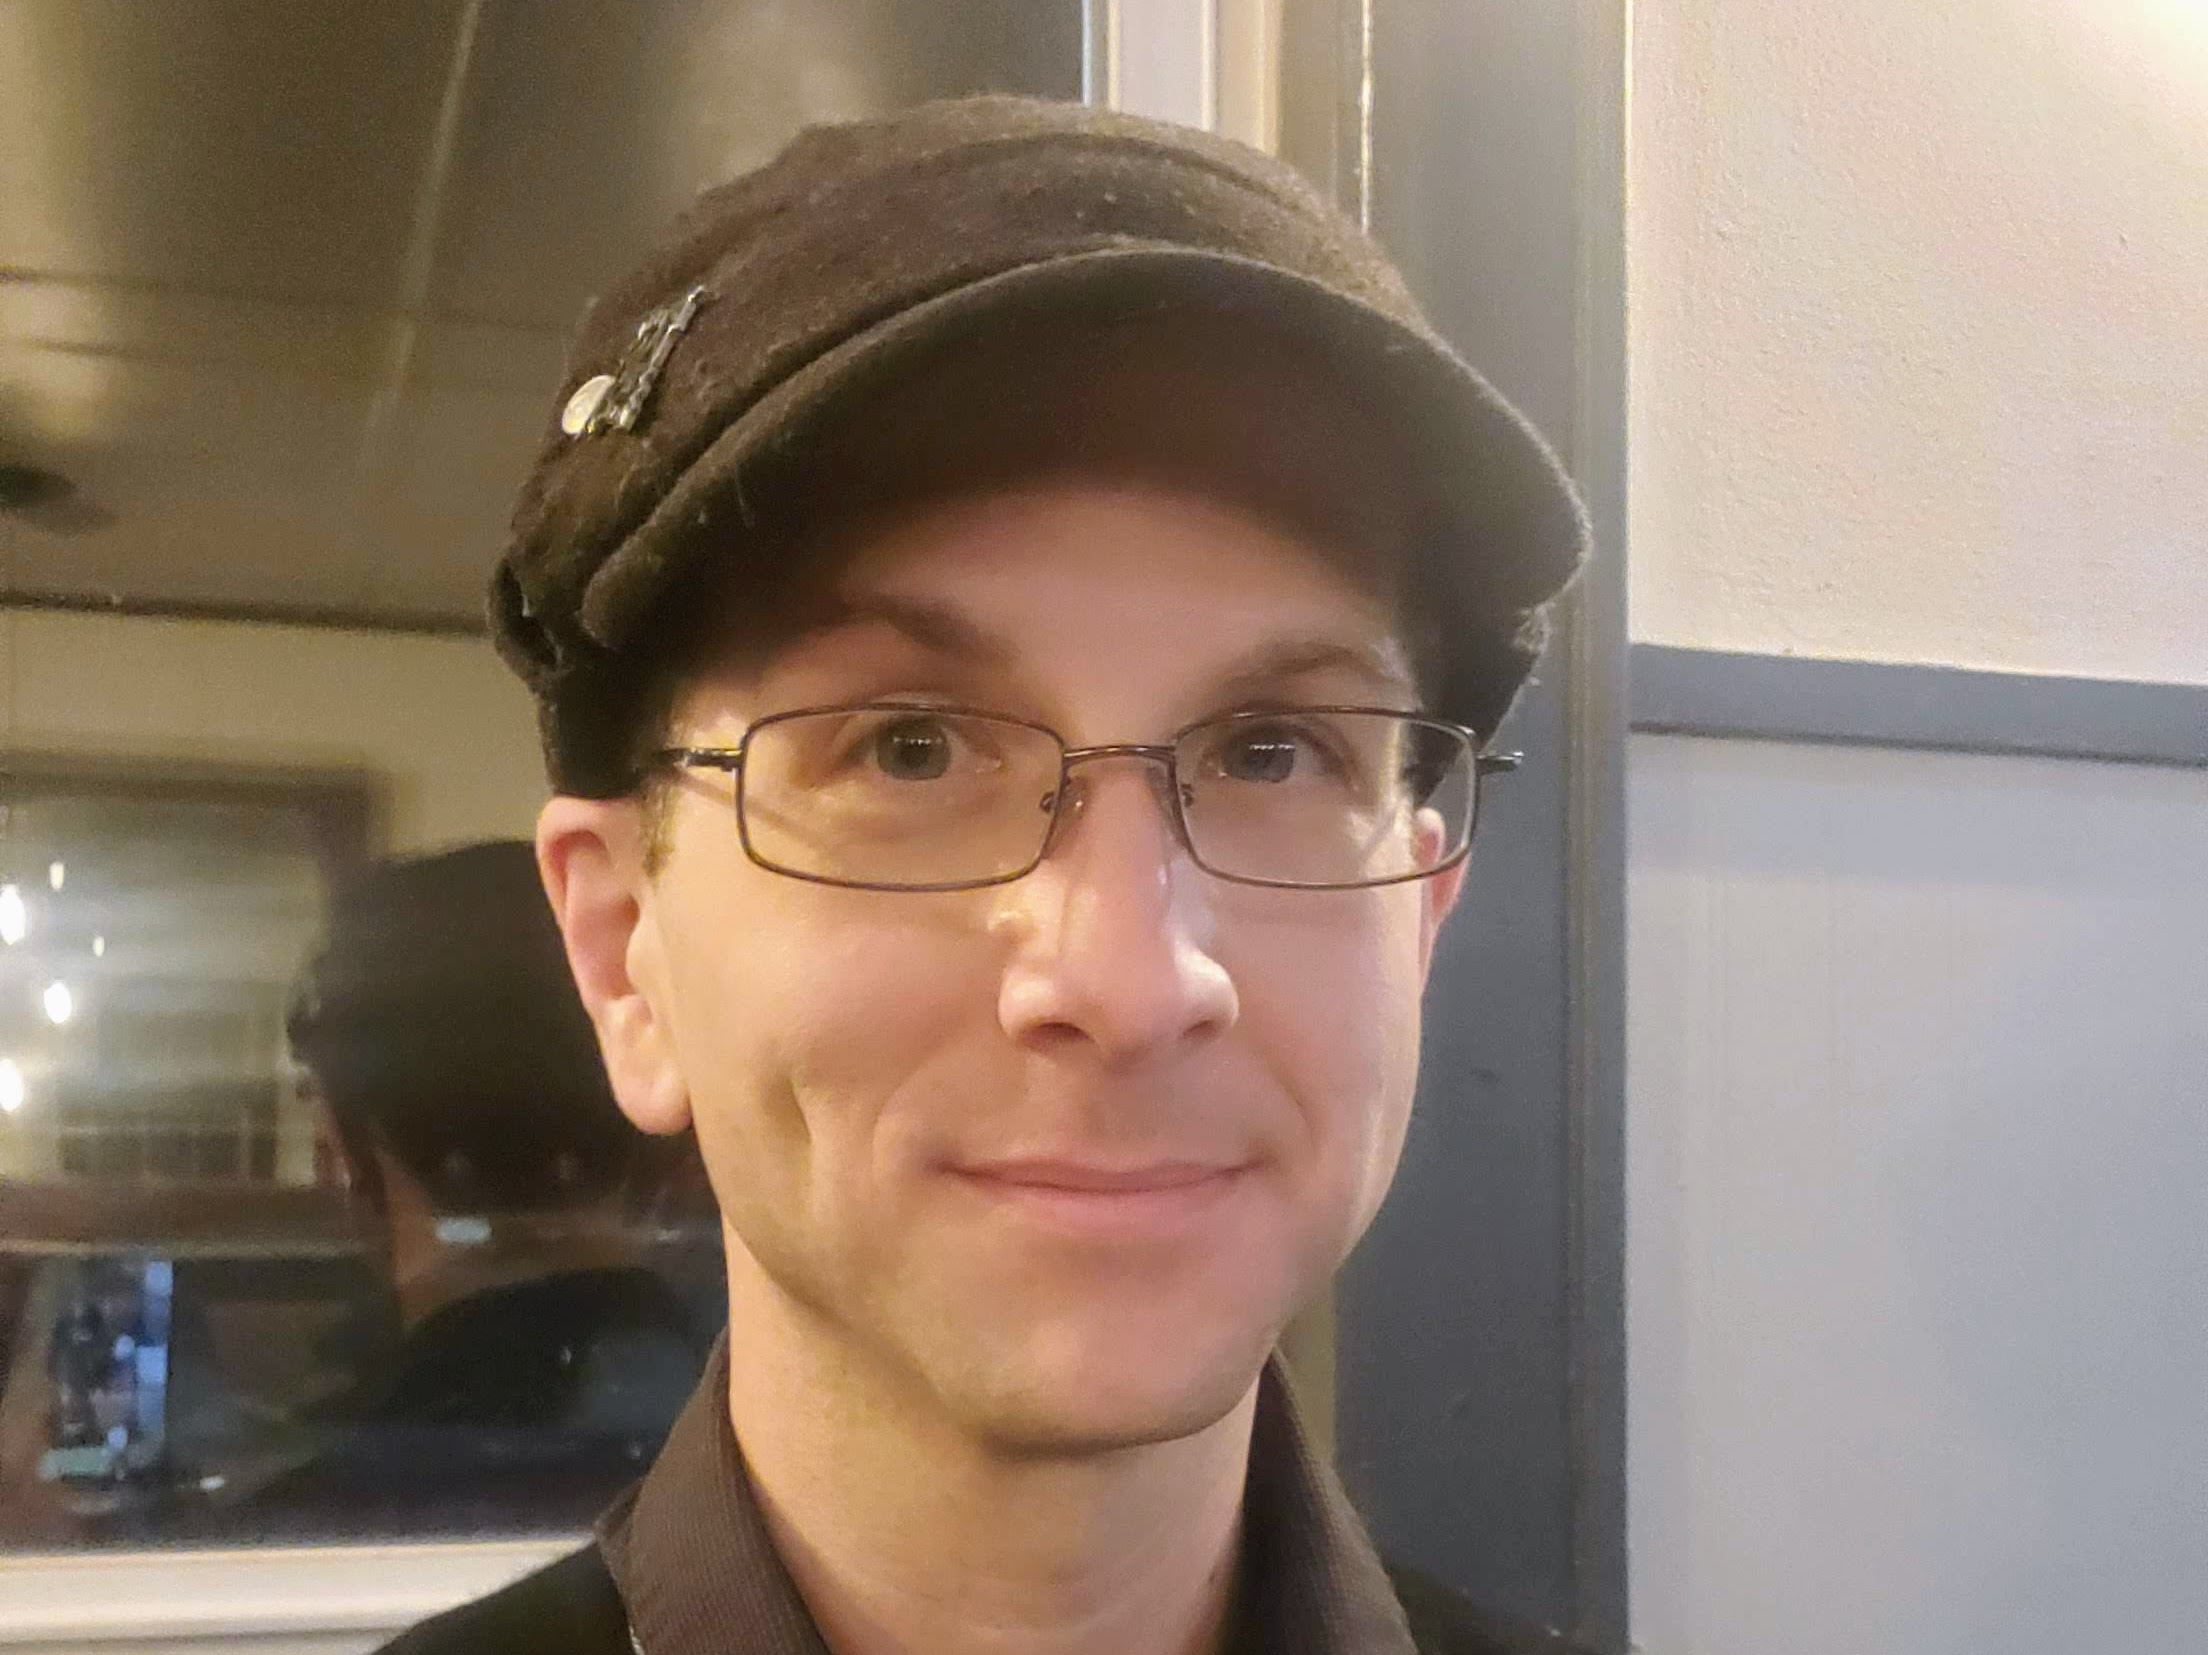 A picture of me slightly smiling at the camera, wearing a hat